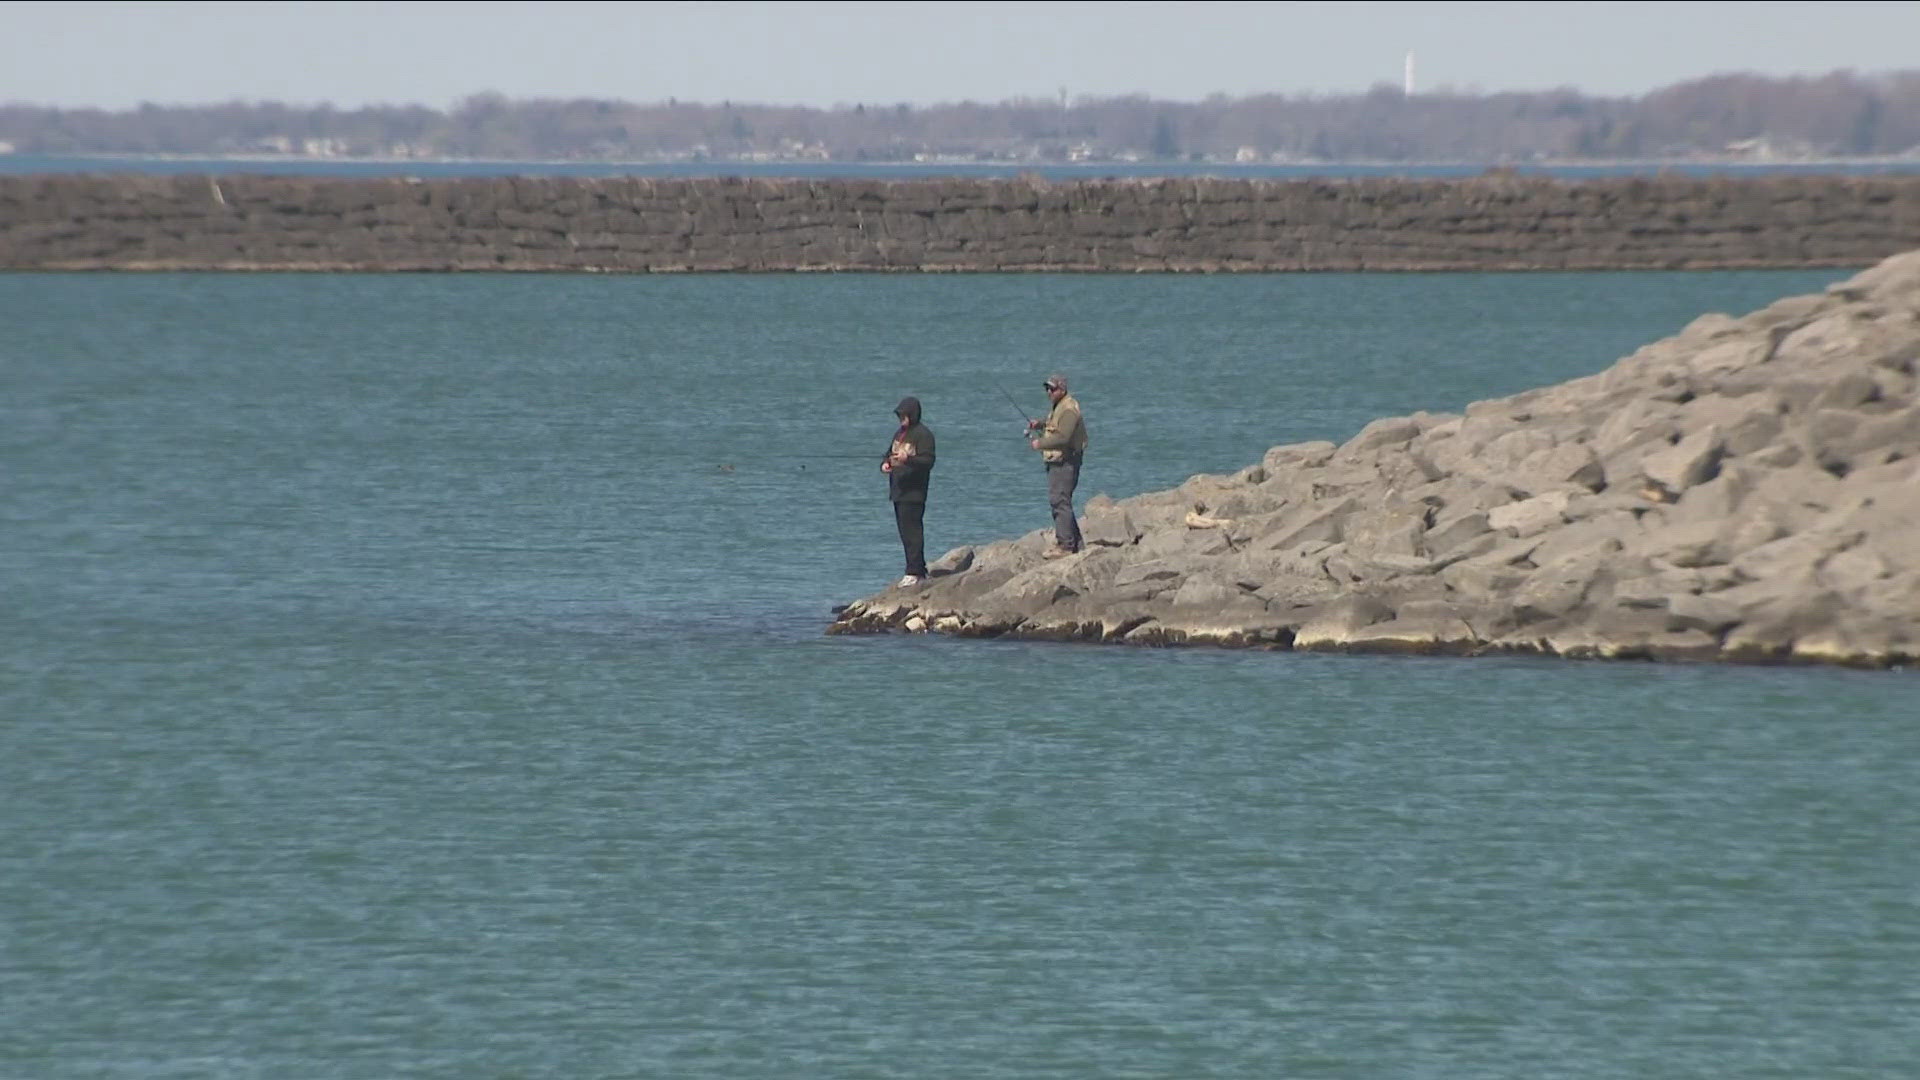 State leaders say pollution has impacted the health of waterways such as Lake Erie and the Buffalo River over the years.